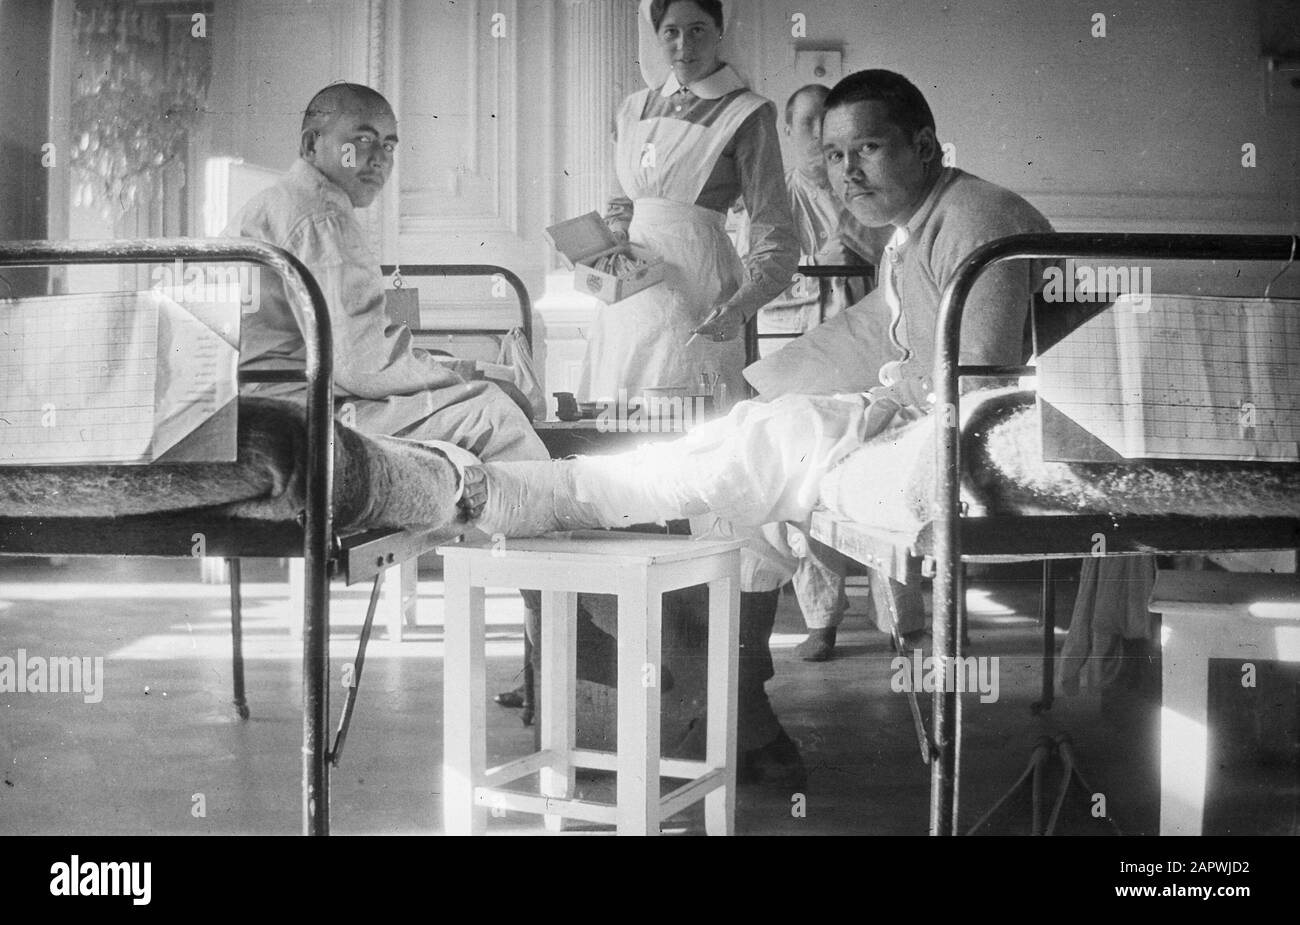 Visit to the Russian front at St. Petersburg  Wounded soldiers in an infirmary with nursing staff Date: 1916 Location: Russia Keywords: military, nursing staff Stock Photo